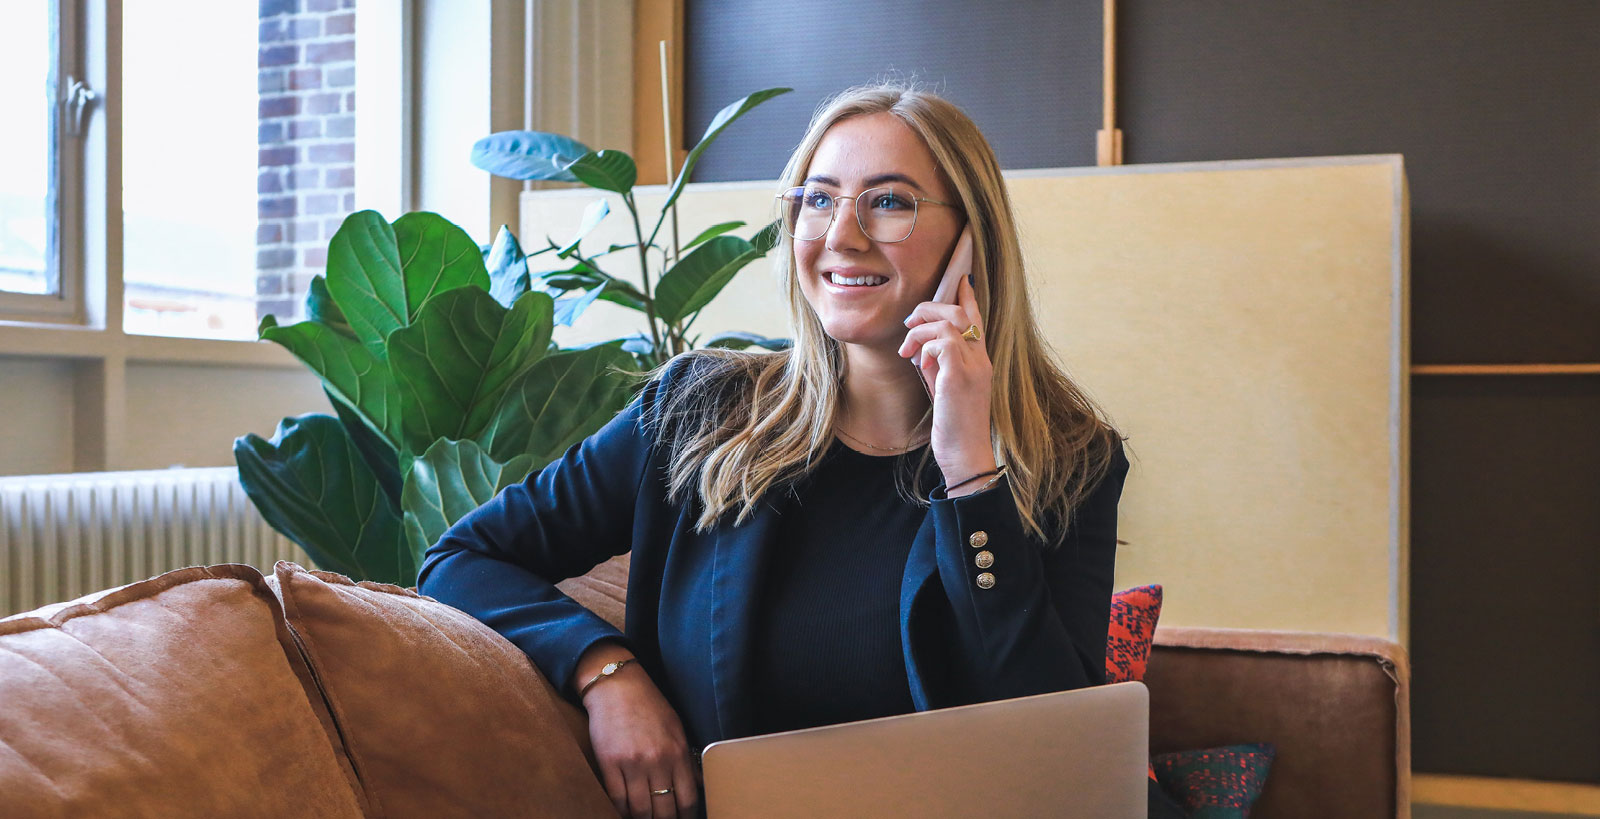 A blonde woman in a blazer smiles whiles on the phone. She's sitting on a brown suede couch with a silver laptop open on her lap.